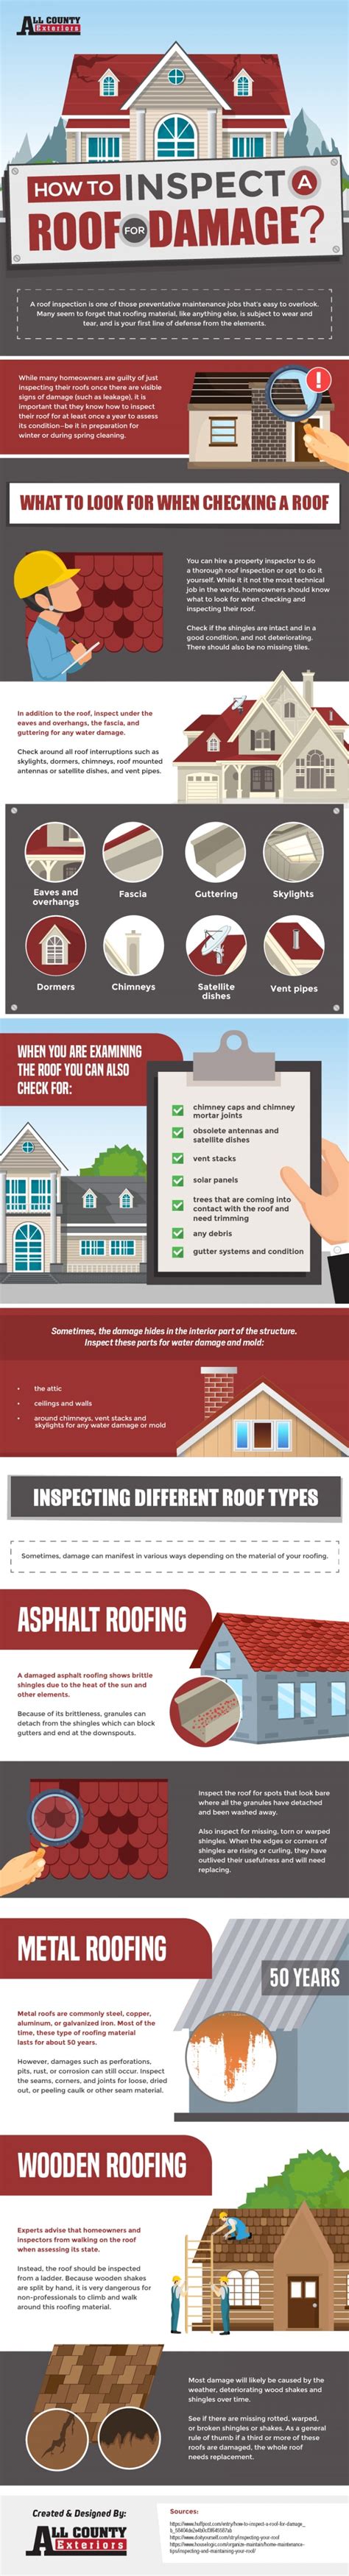 Roof Damage Inspection Infographic Confessions Of The Professions